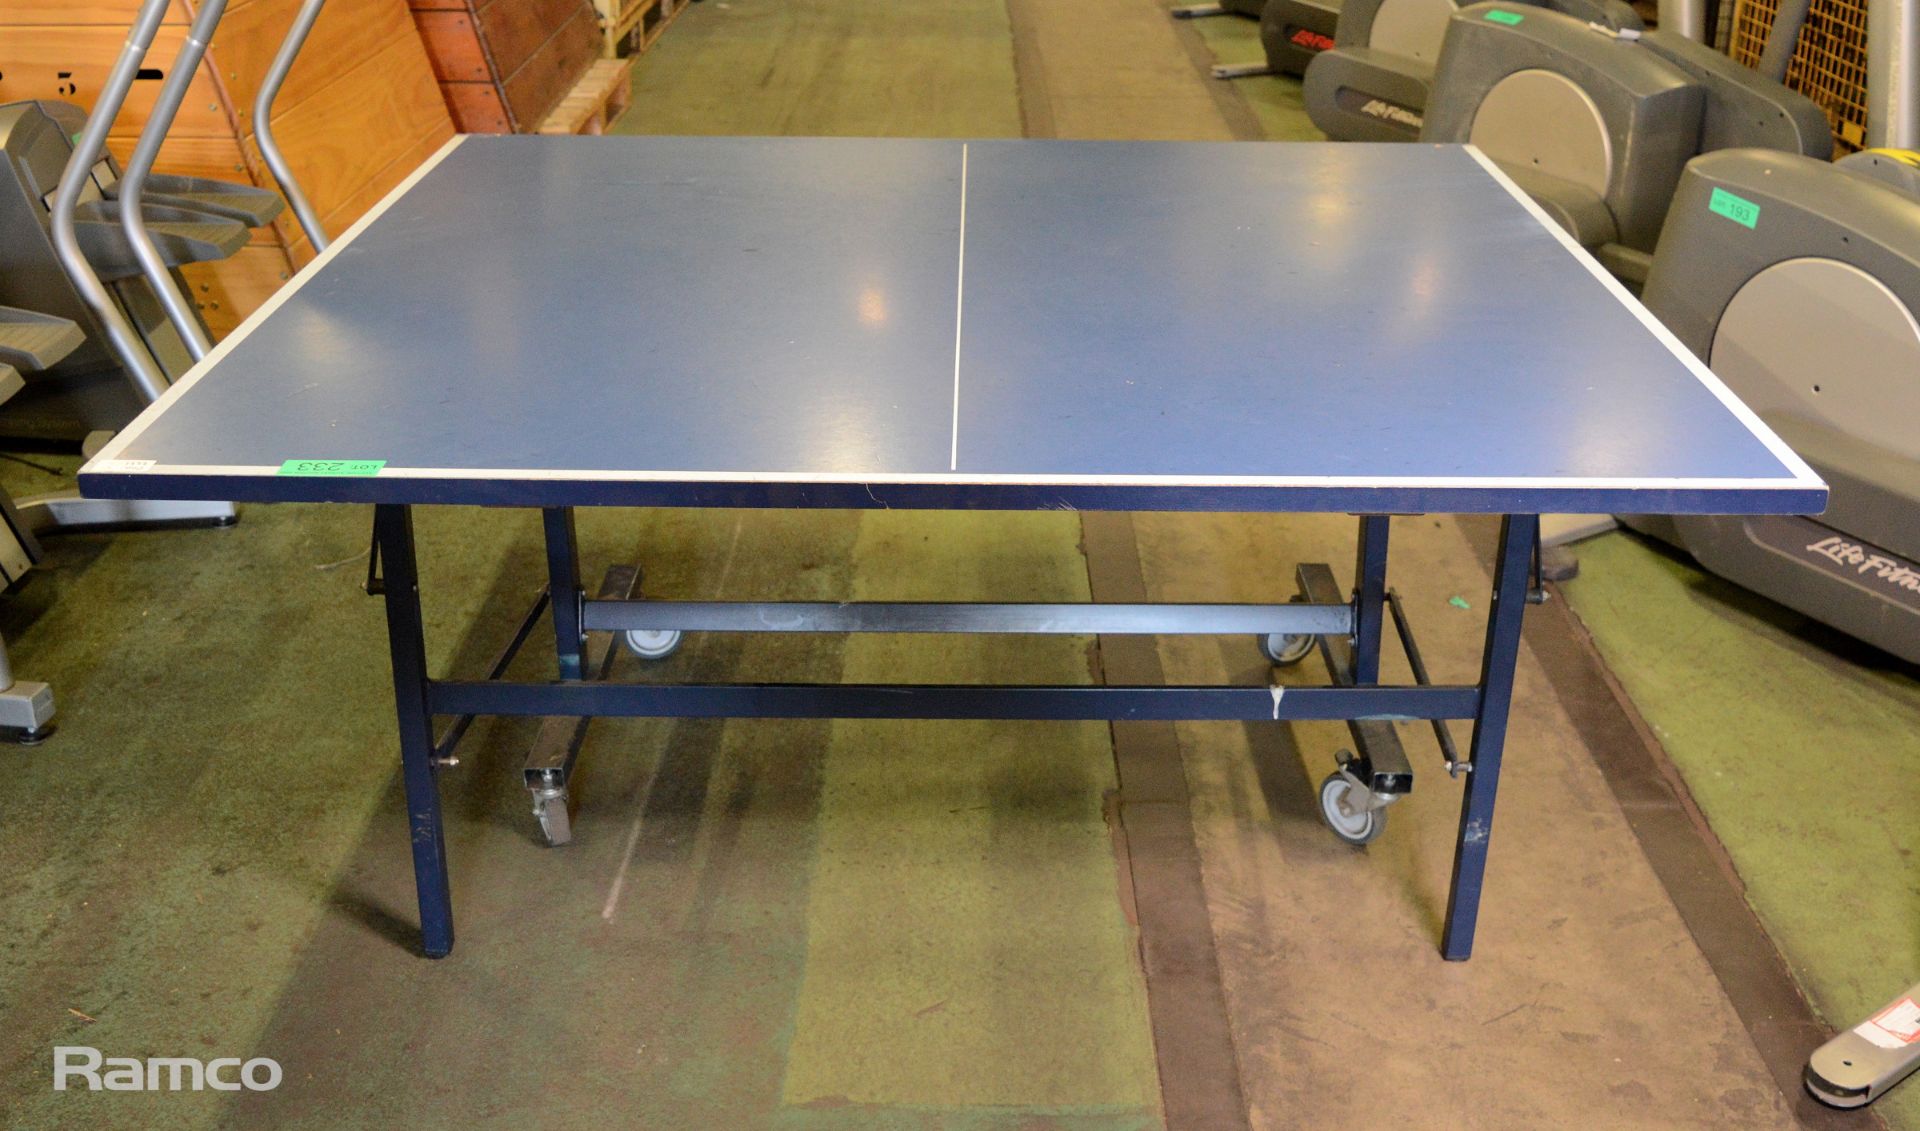 Stiga Expert Roller Table tennis table L 274 x W 152 x H 76cm - Image 5 of 5